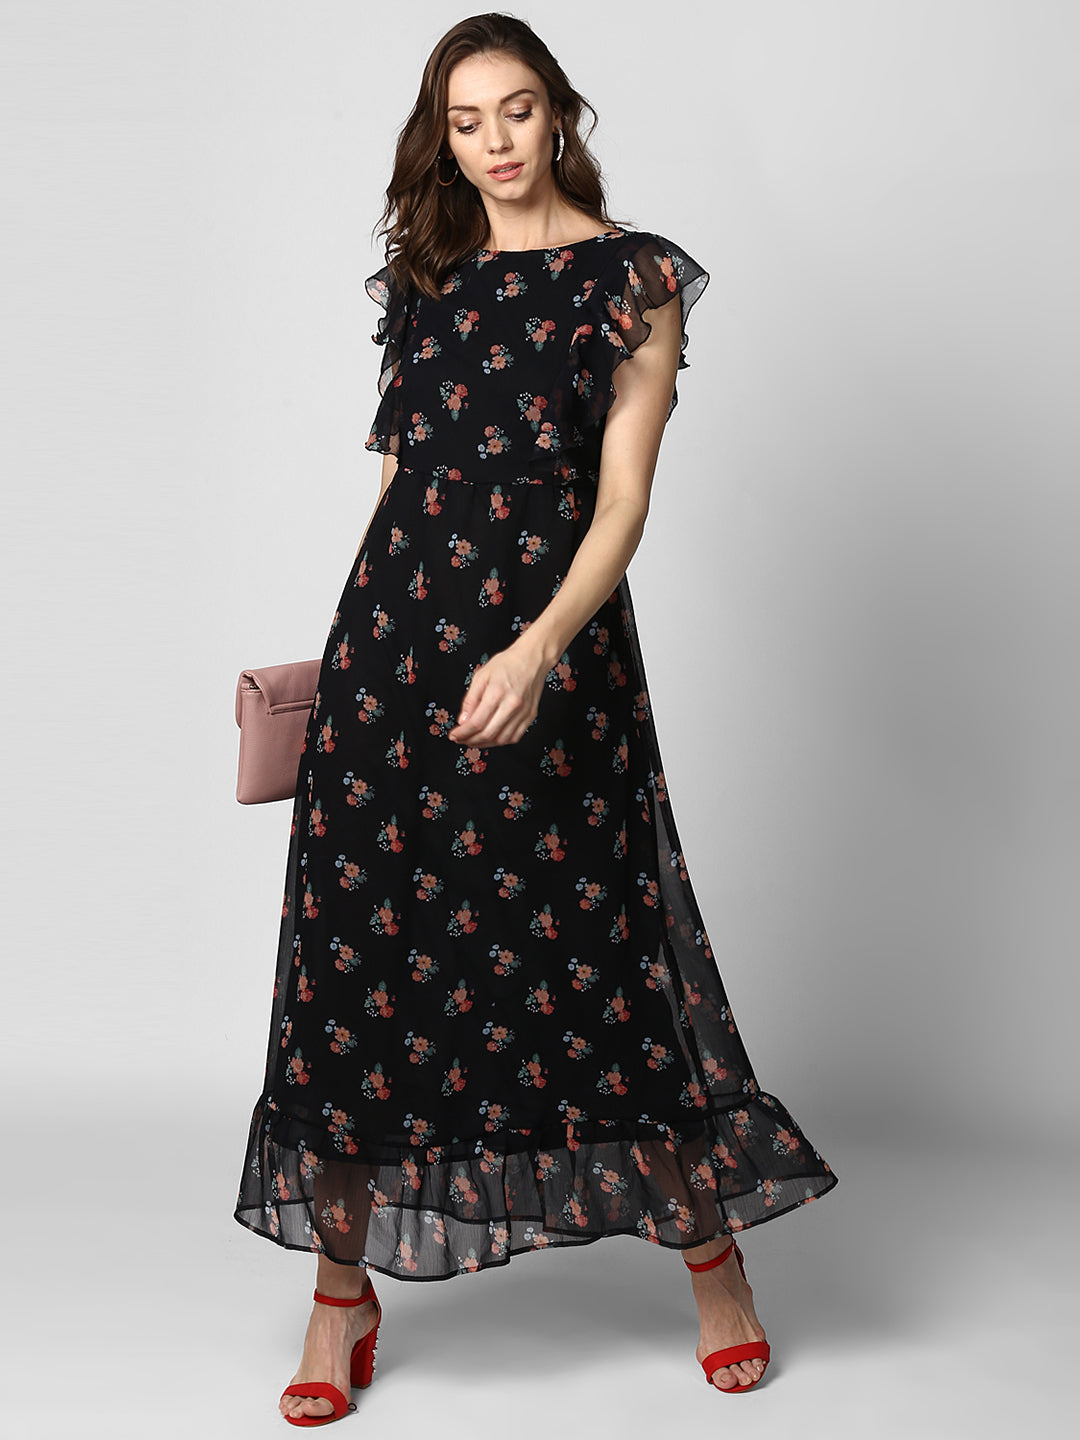 Women's Black Printed Maxi Dress with Lining